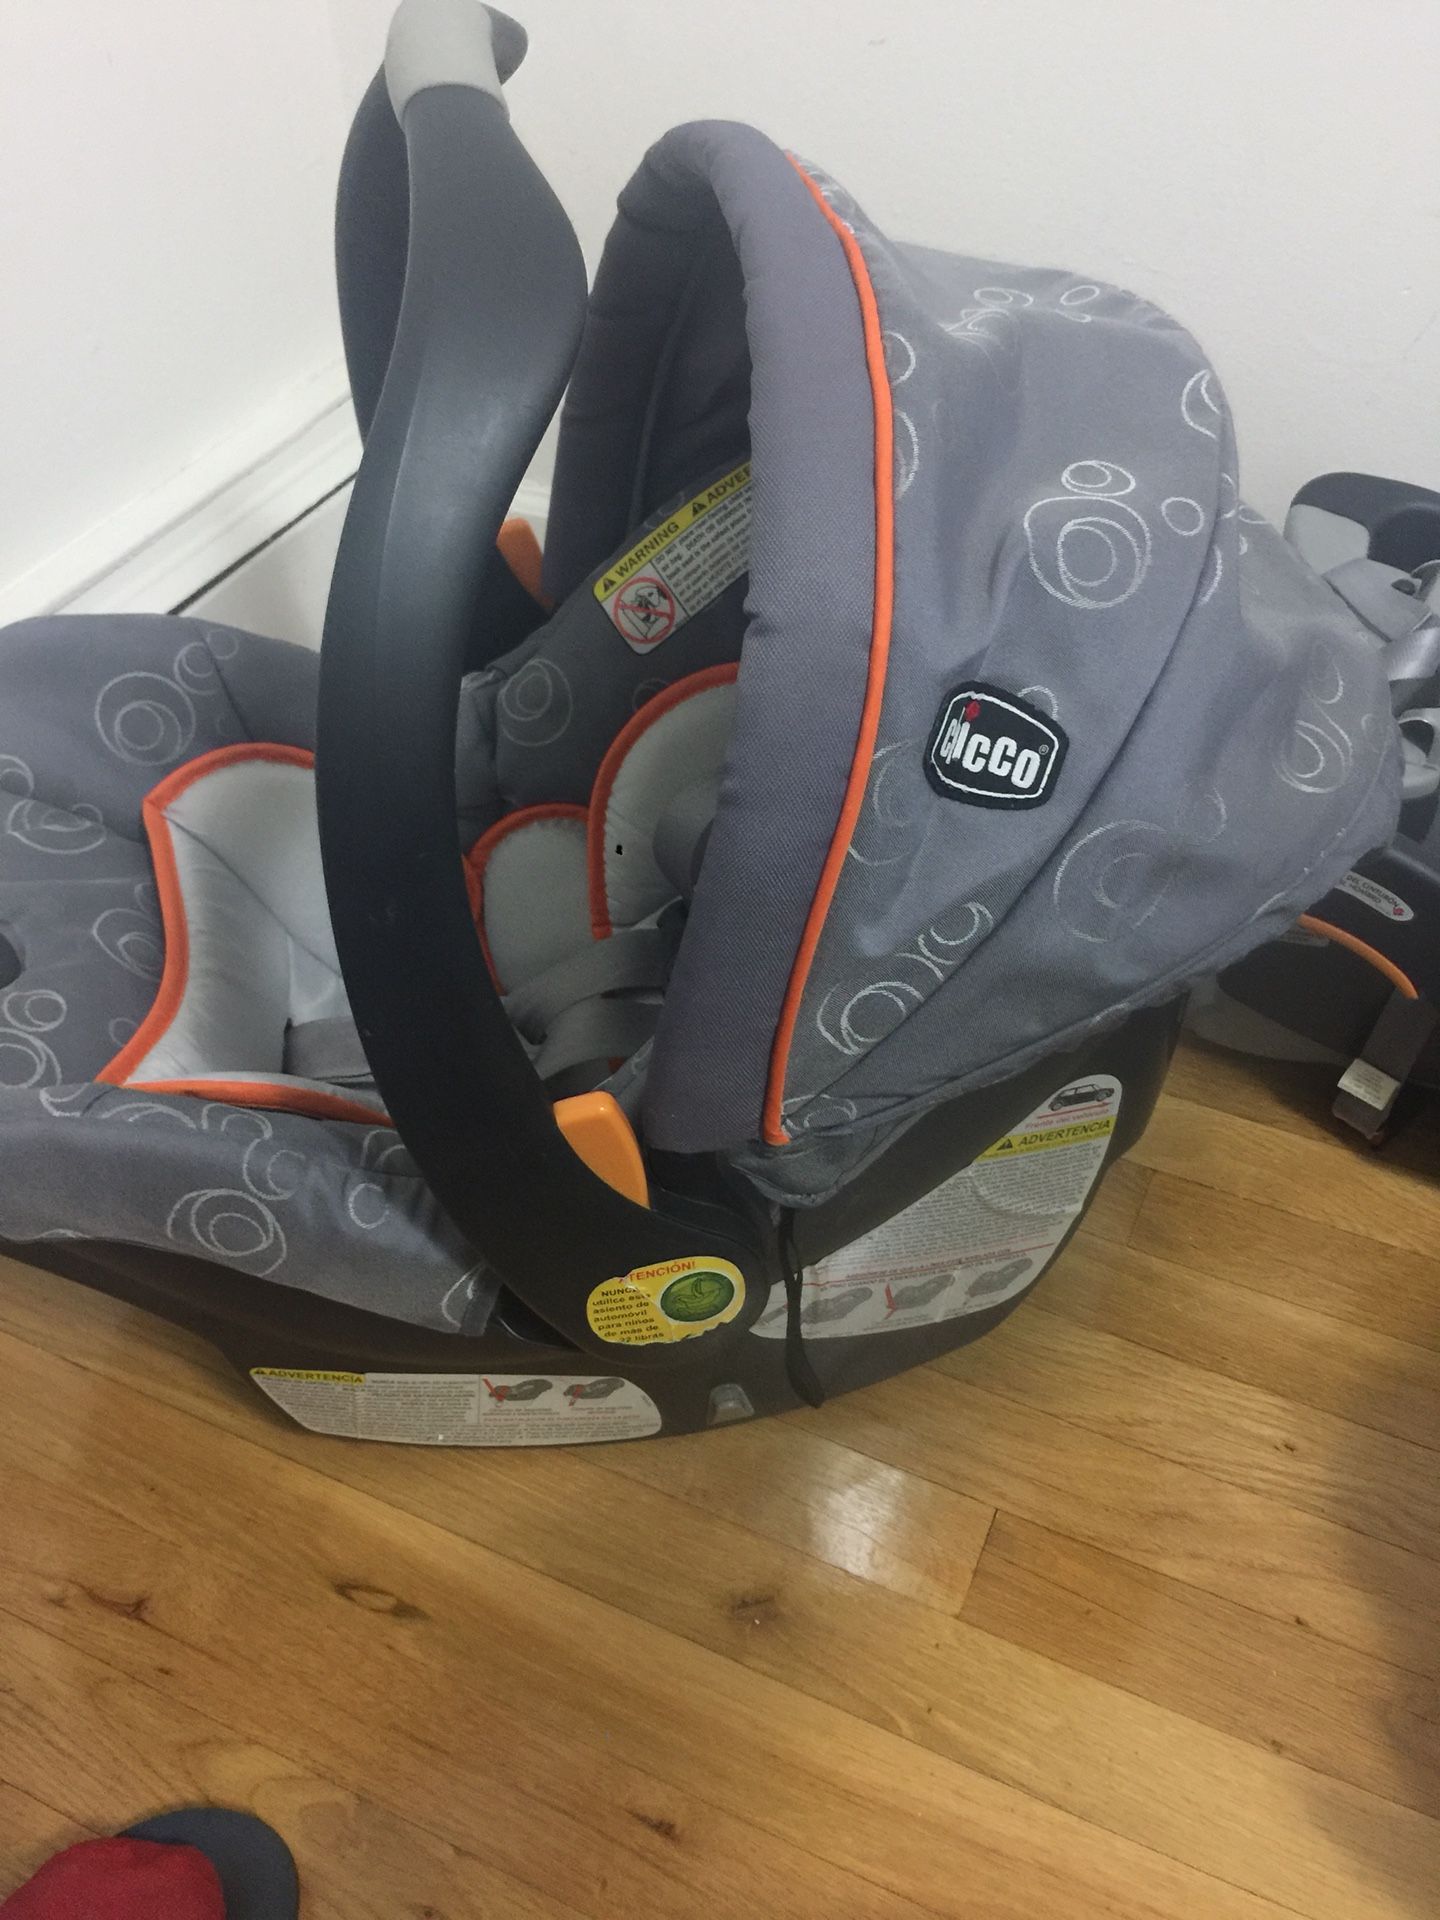 Chicco Infant Car Seat